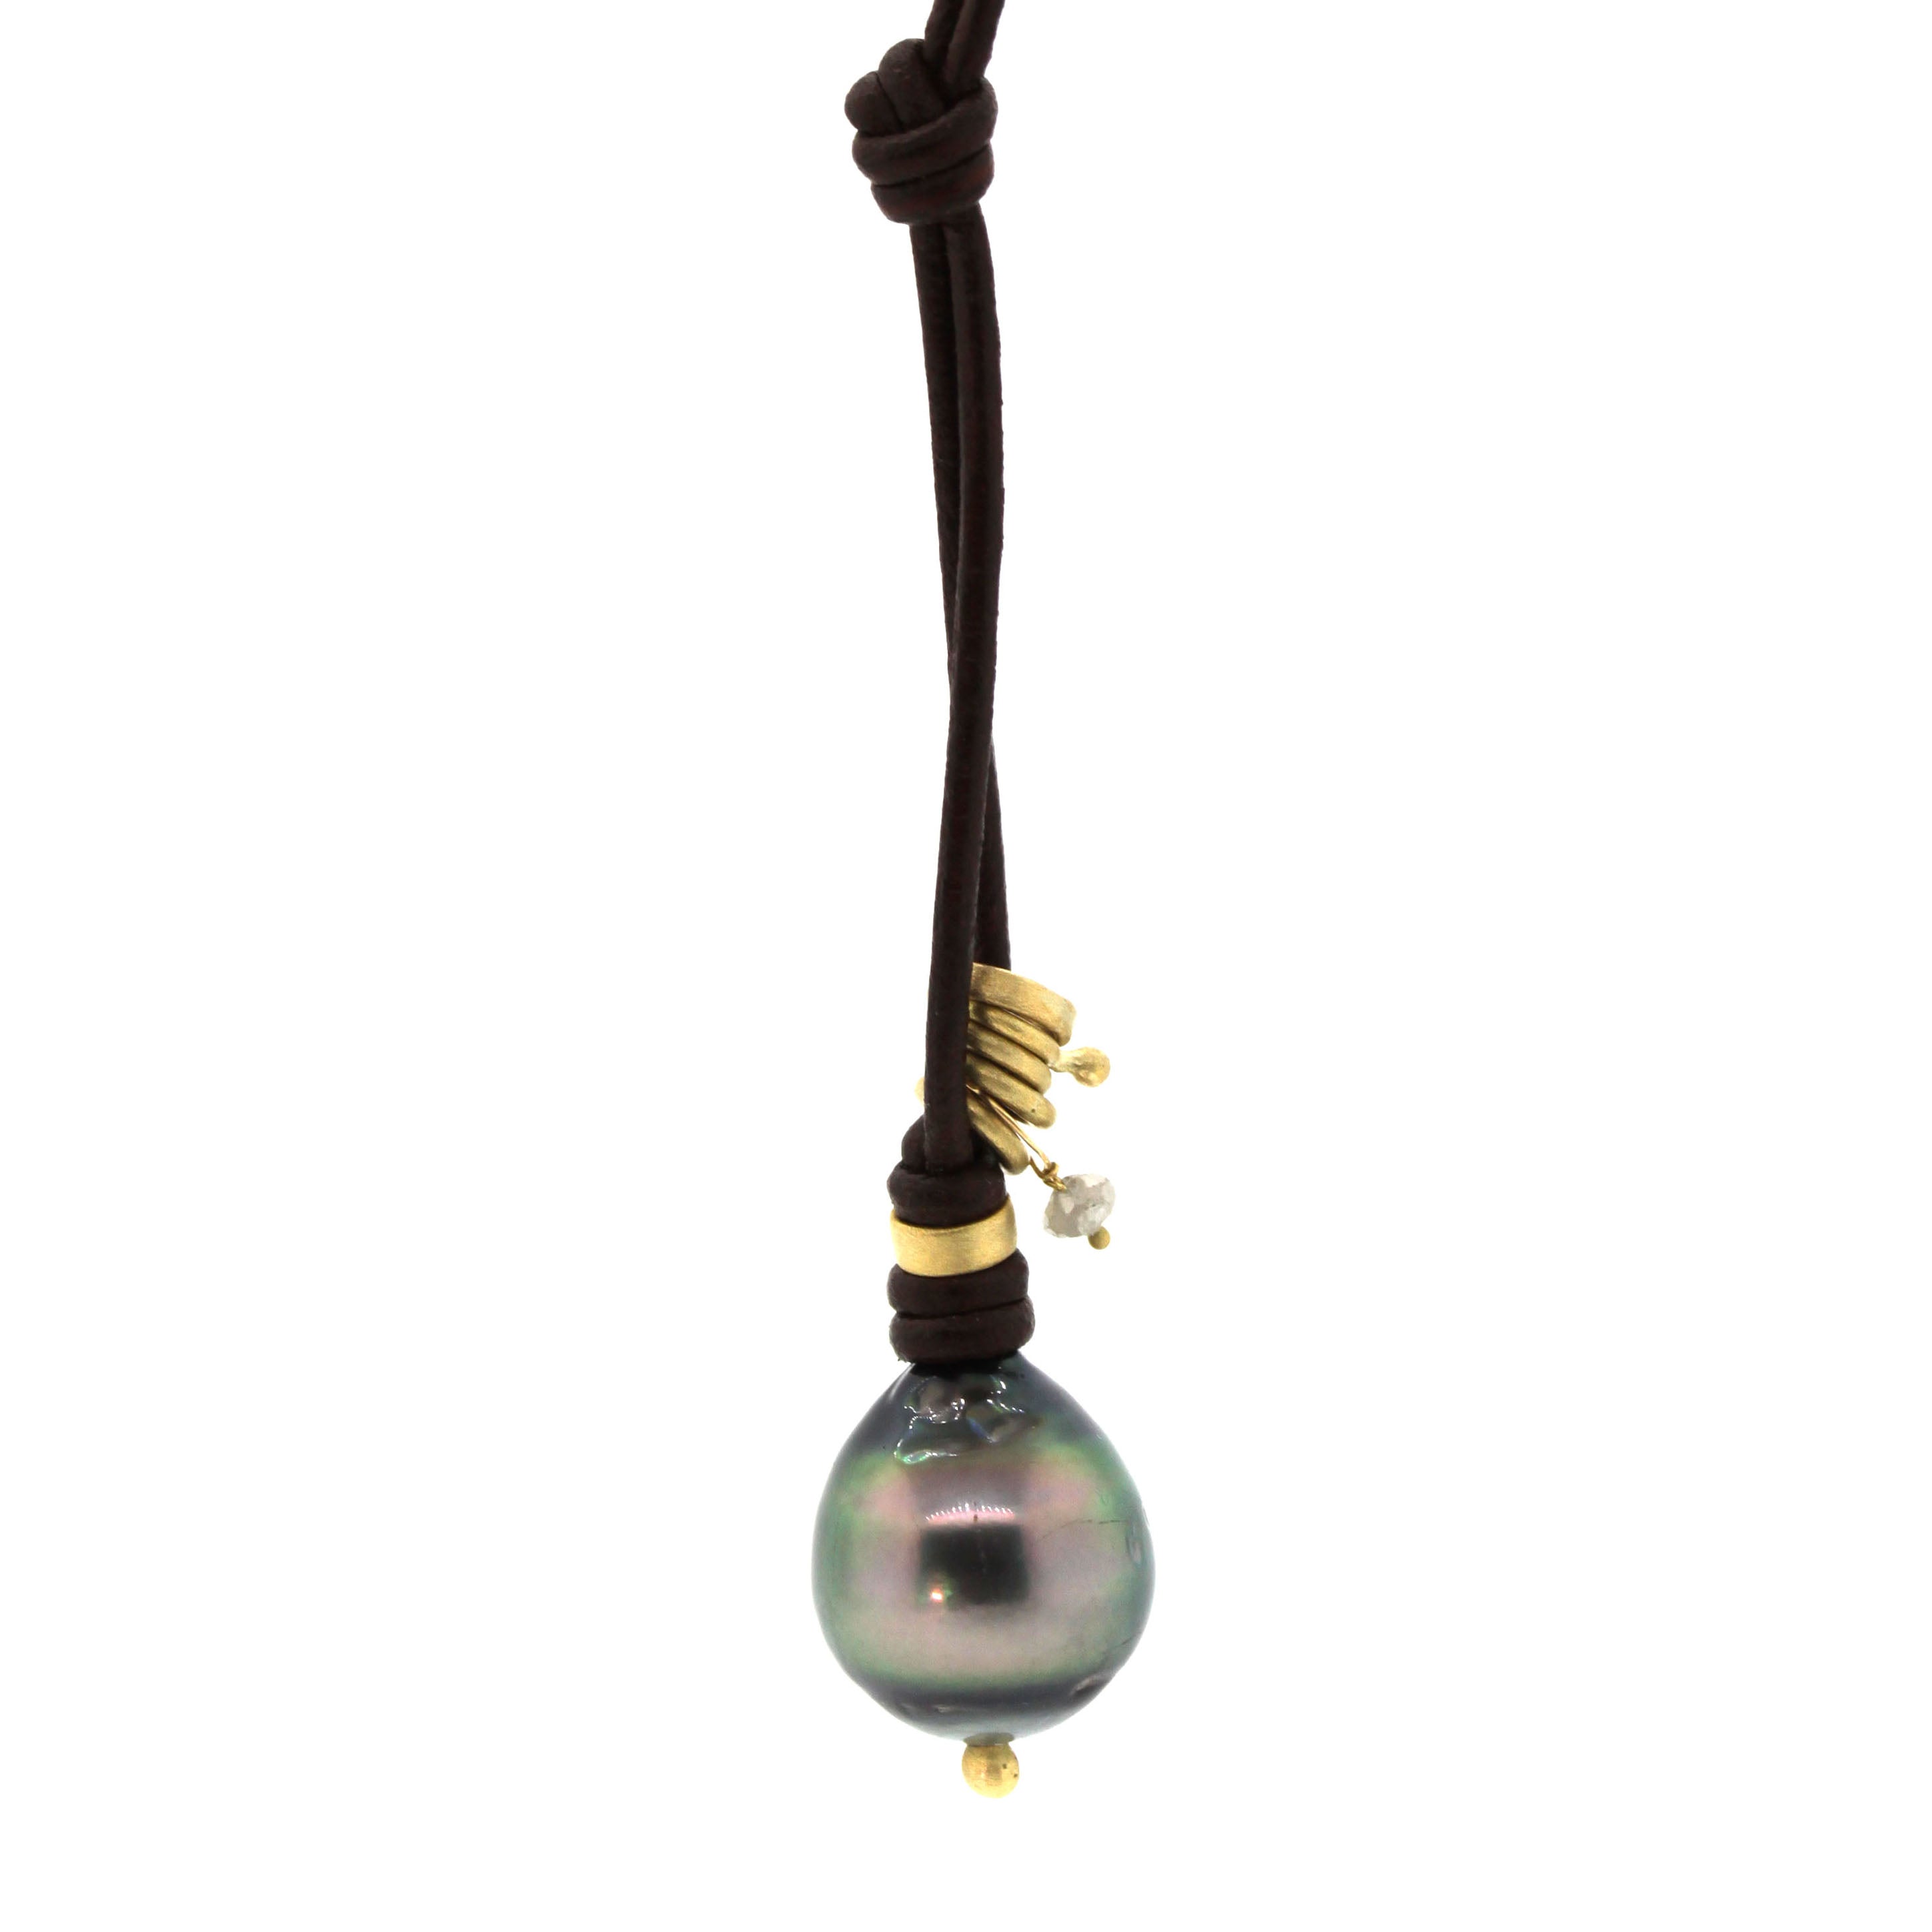 This Charmed Tahitian Pearl Leather Necklace consists of a mix of yellow gold rings and knubs with a diamond dangle all accenting a gorgeous Tahitian Pearl. This piece was handcrafted at Rebecca Lankford Designs in Houston, TX.